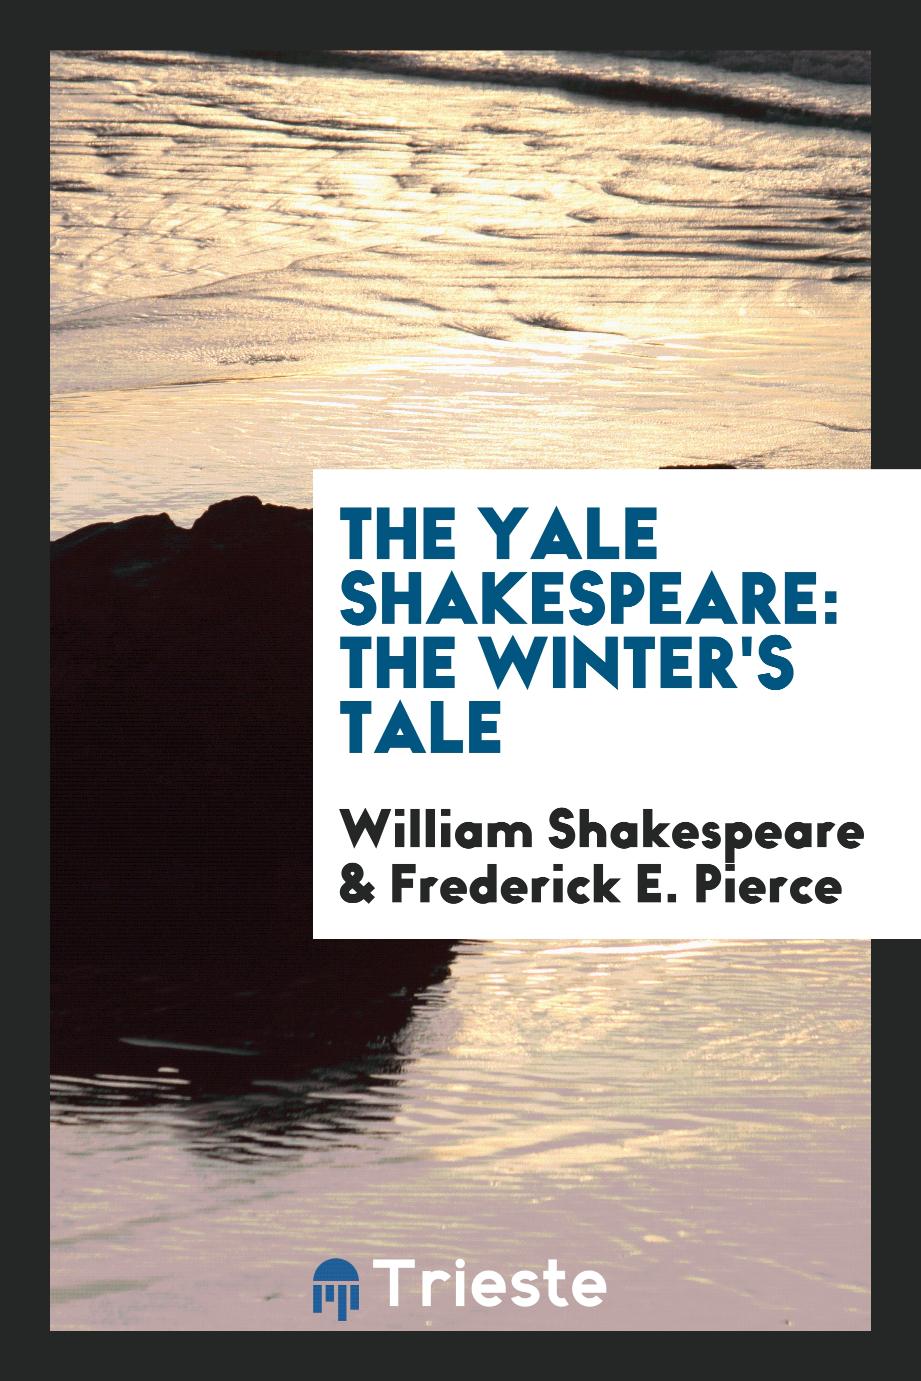 The Yale Shakespeare: The Winter's Tale